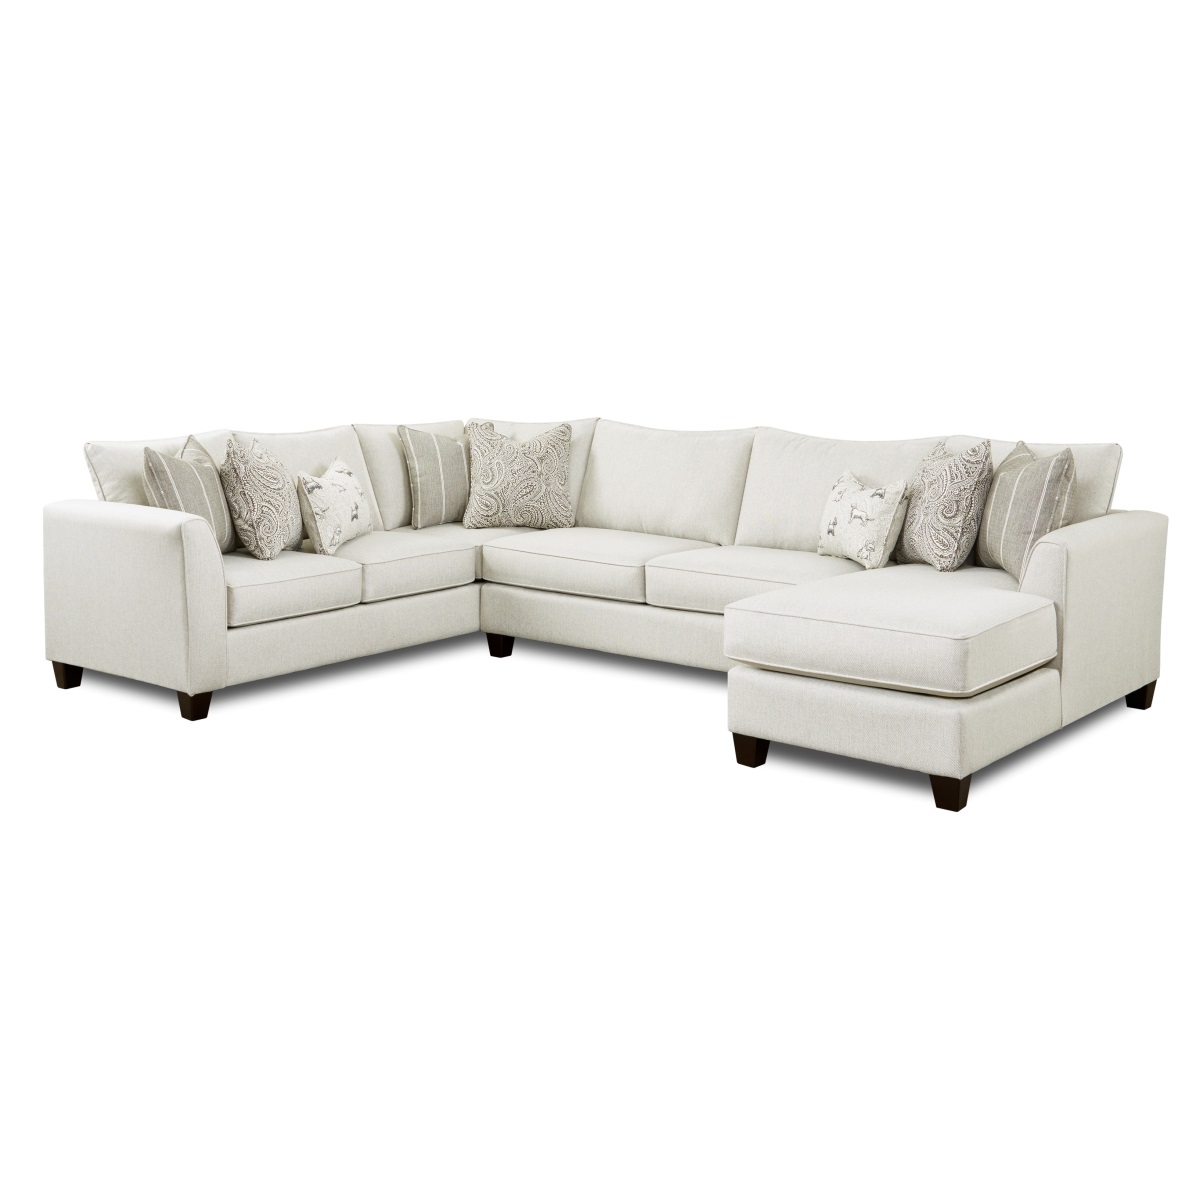 3-piece sectional